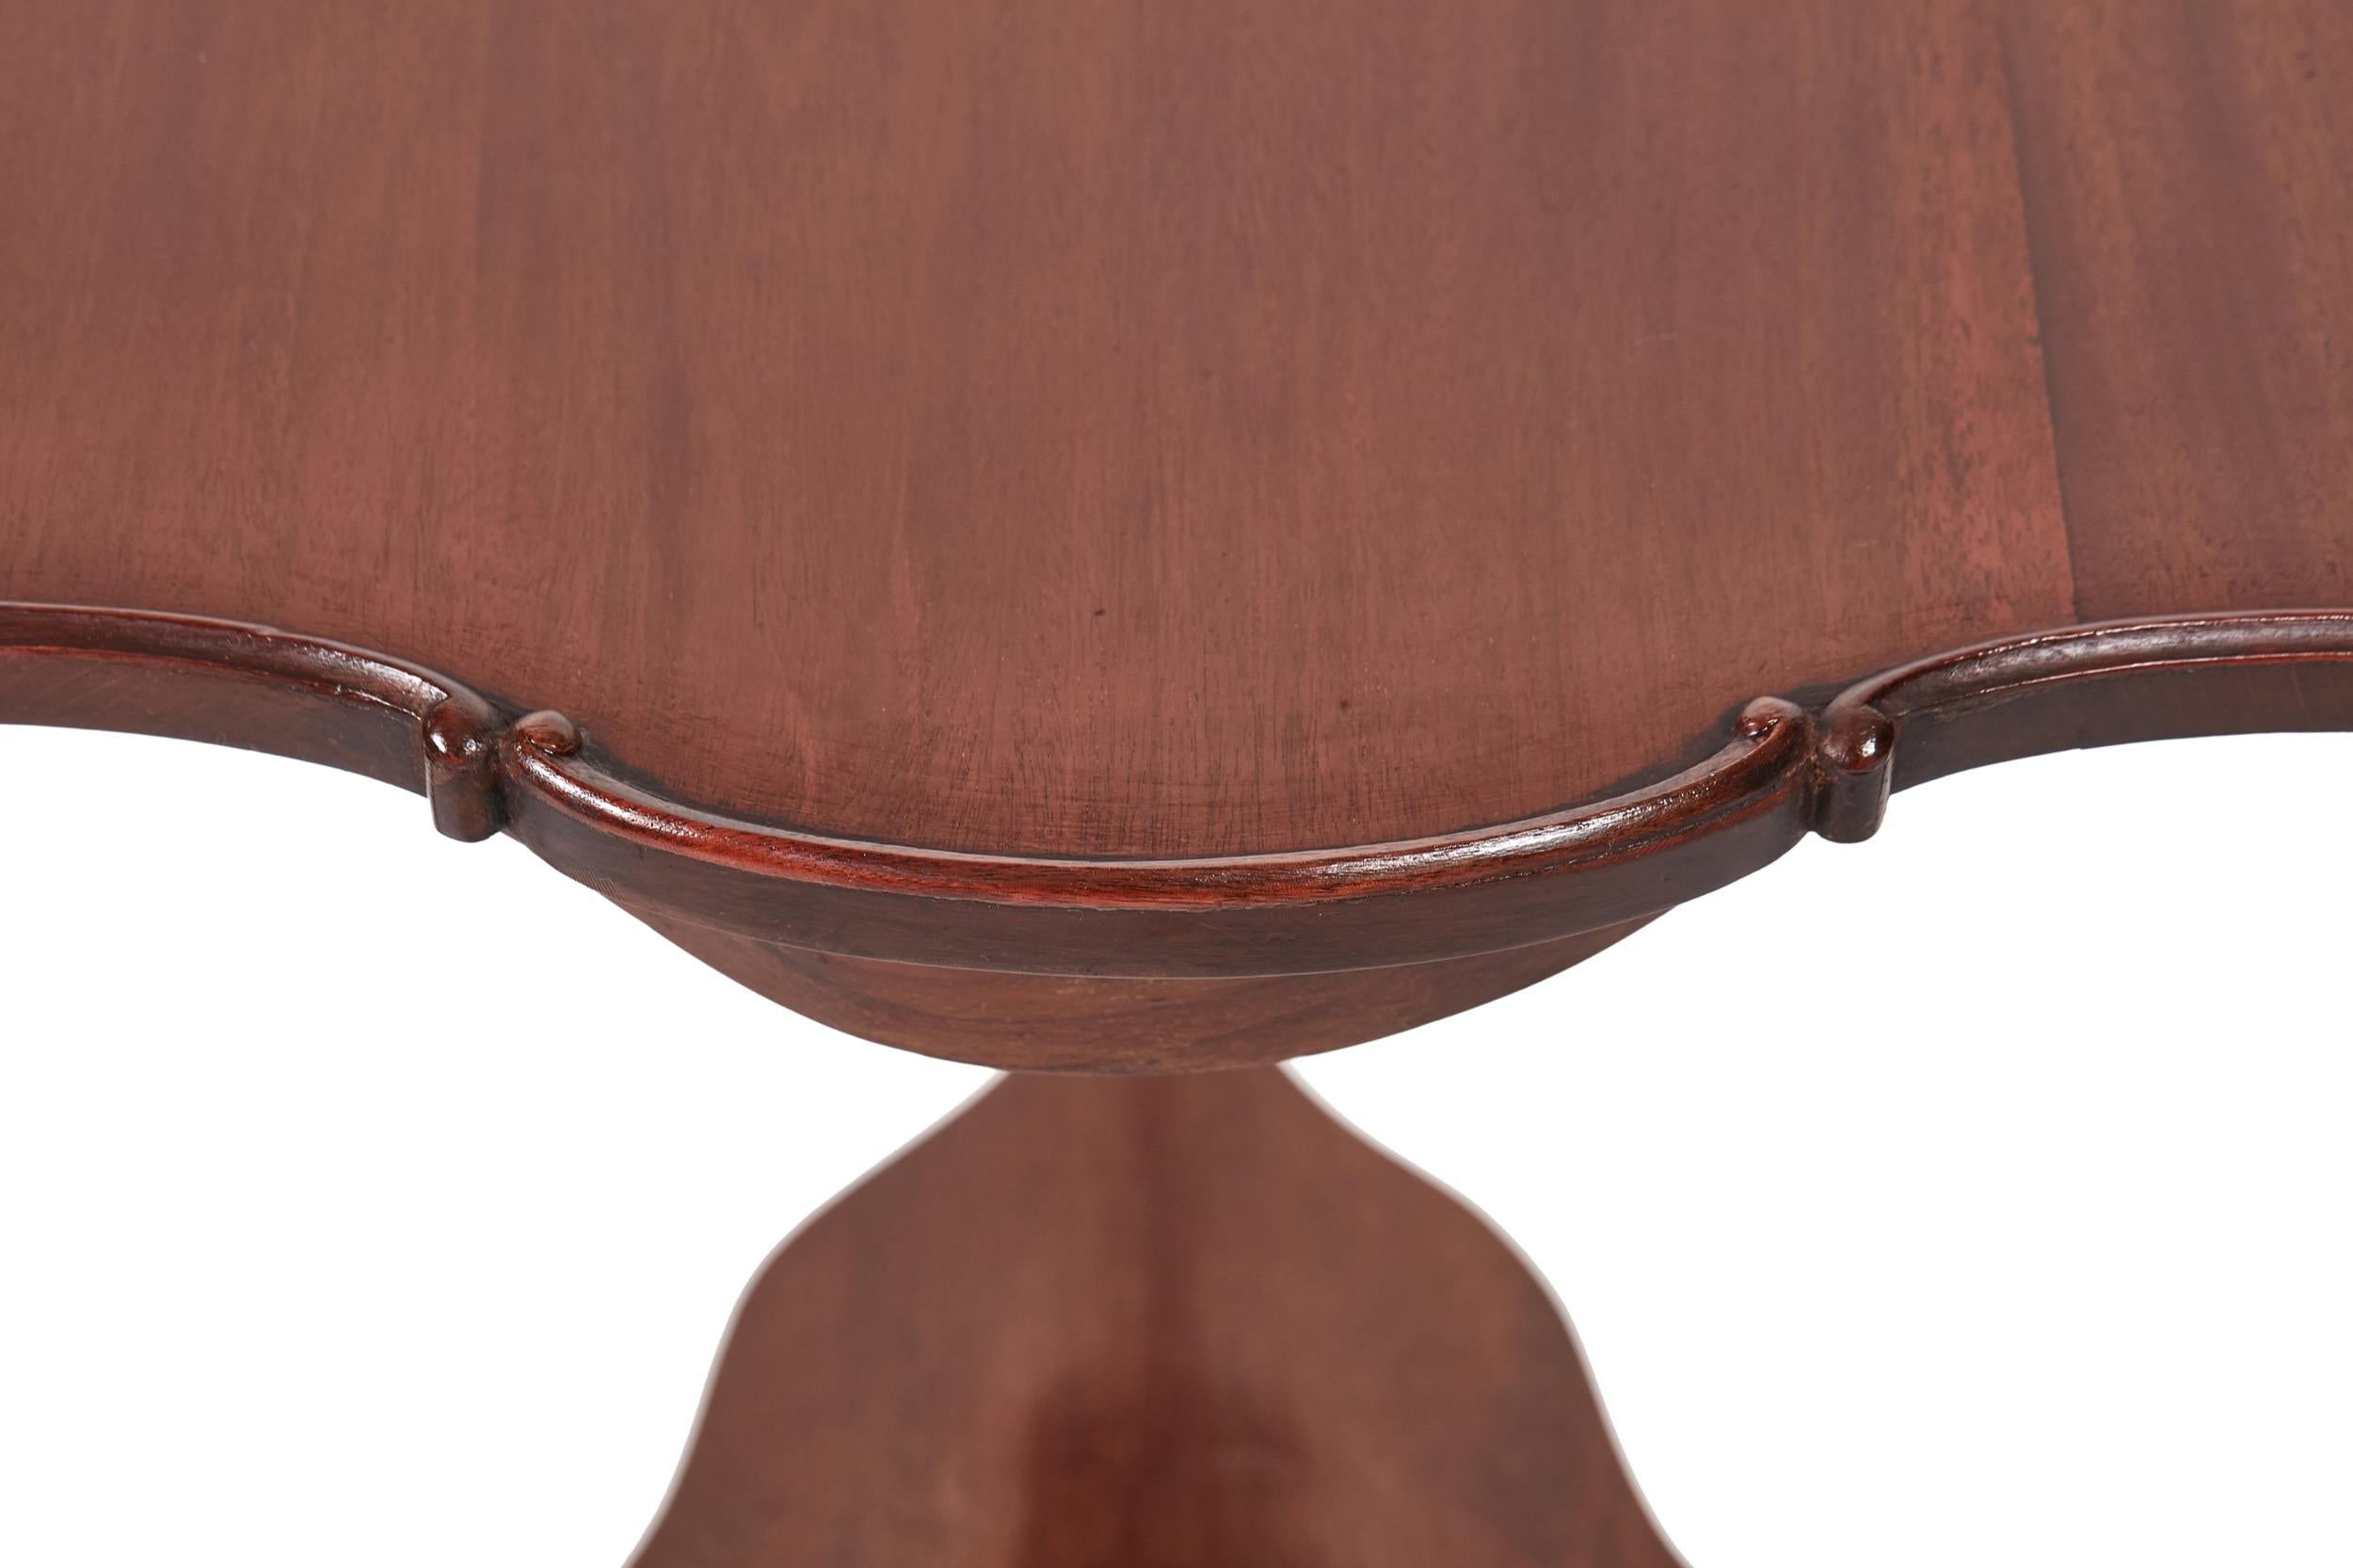 Quality Edwardian mahogany shaped top lamp table, having a lovely quality shaped mahogany top with a carved molded edge, shaped frieze, supported by three lovely shaped solid mahogany cabriole legs, united by a shaped under-tier
fantastic color and